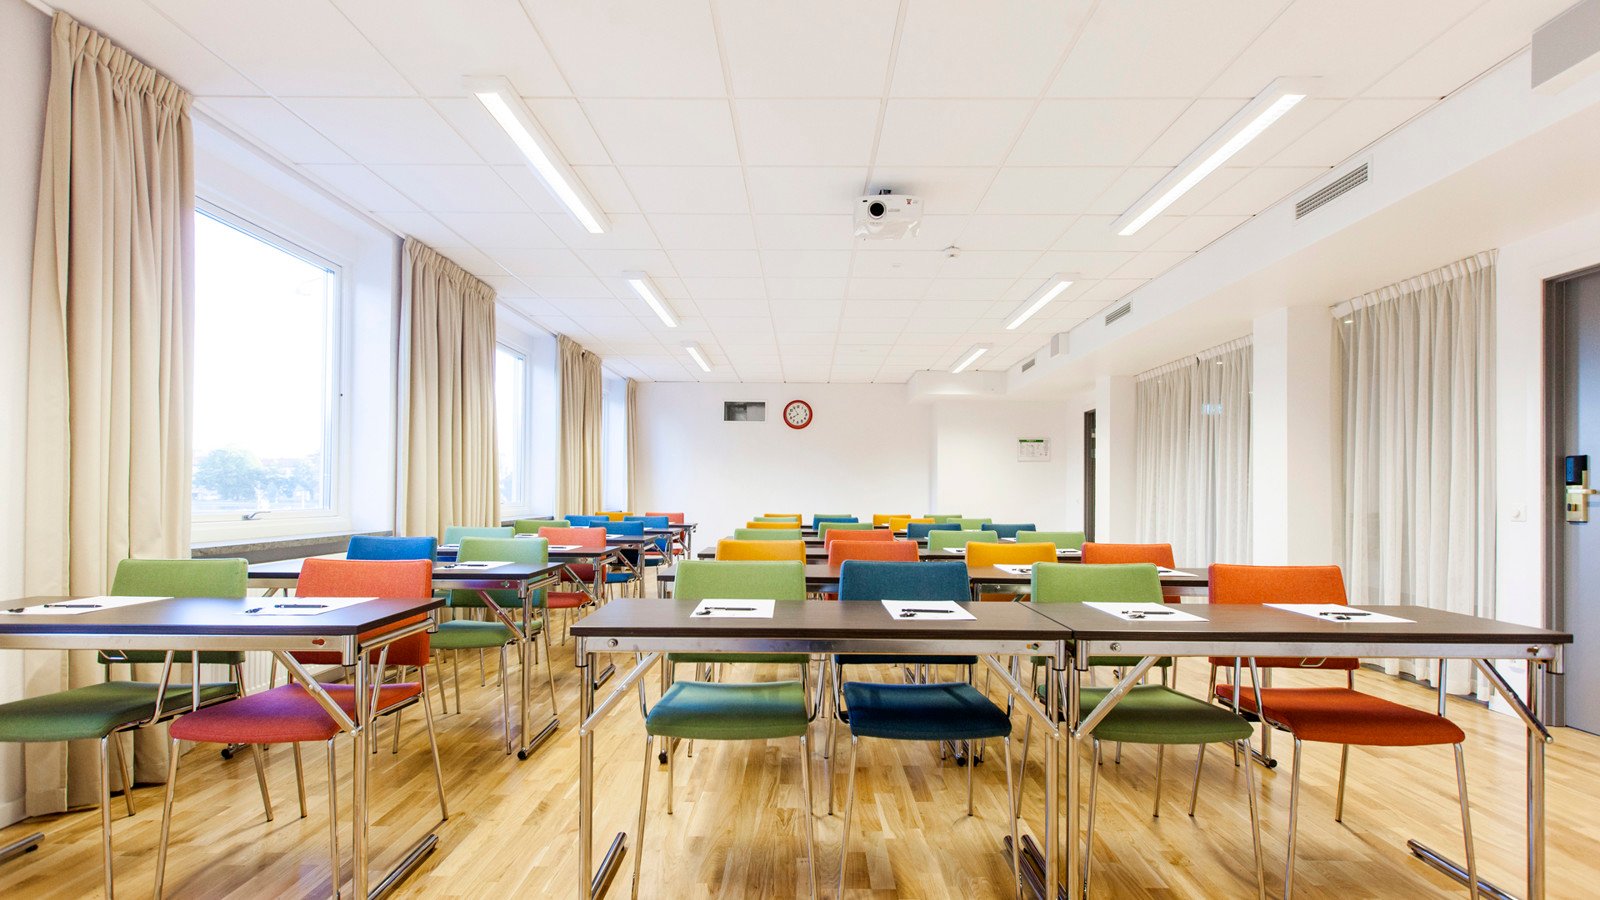 Big room with wooden floor boards and many colourful chairs